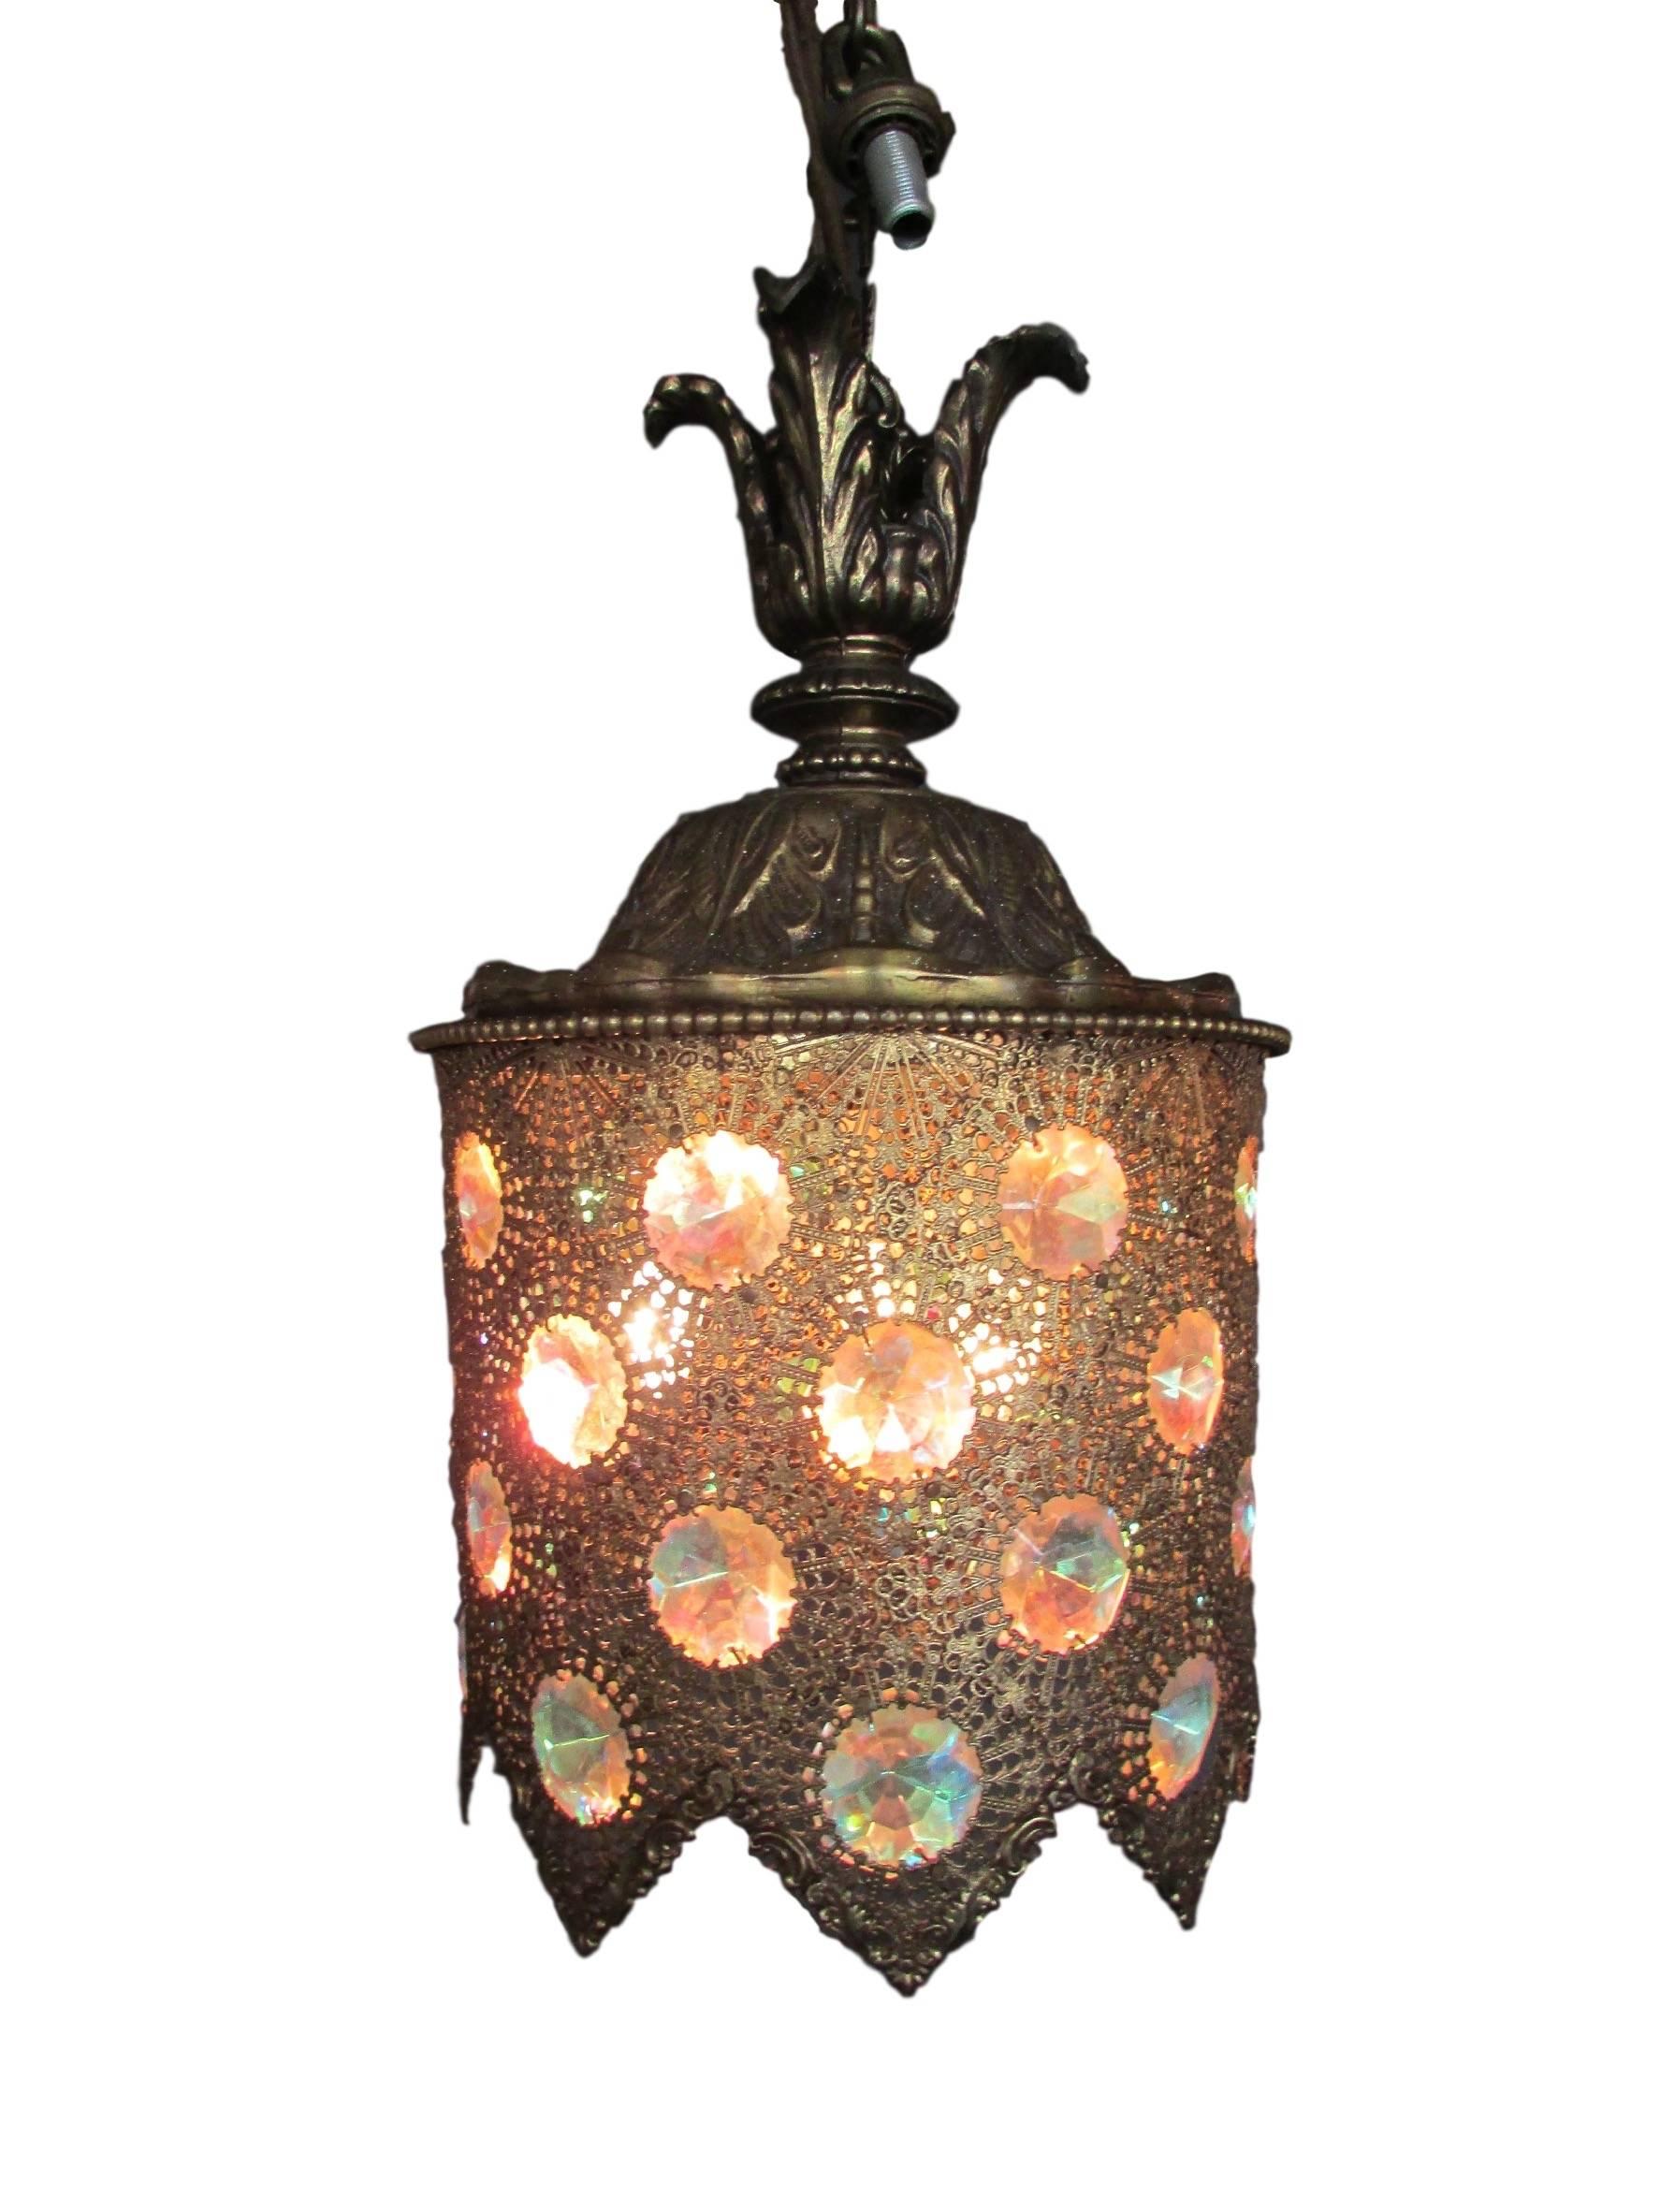 This is a brass filigree pendant light with beautiful cut iridescent jewels circa 1950.  When the light is turned off, the jewels appear blue.  When the light is turned on, the jewels appear pink. 